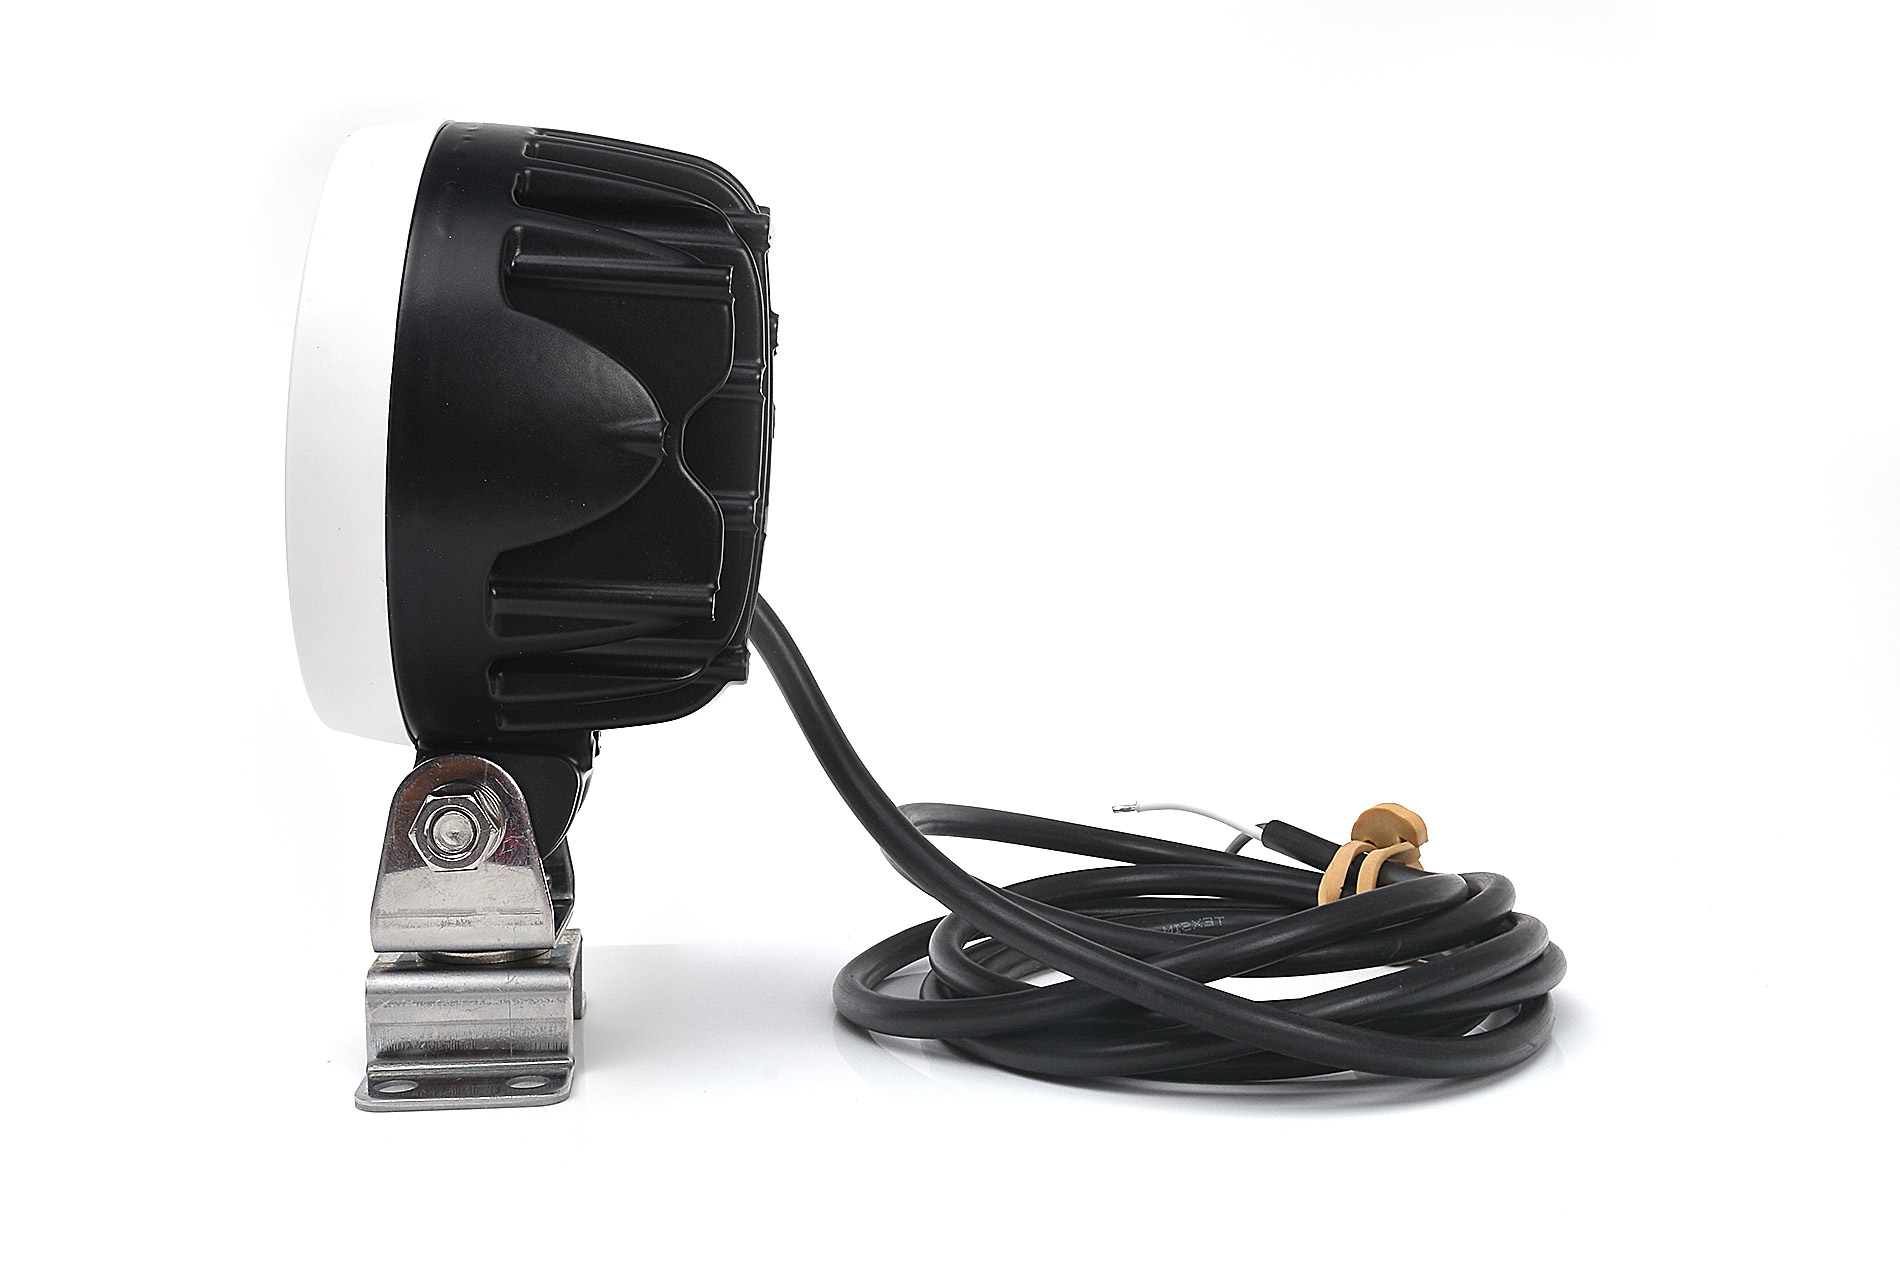 Work lamps - W162 7000